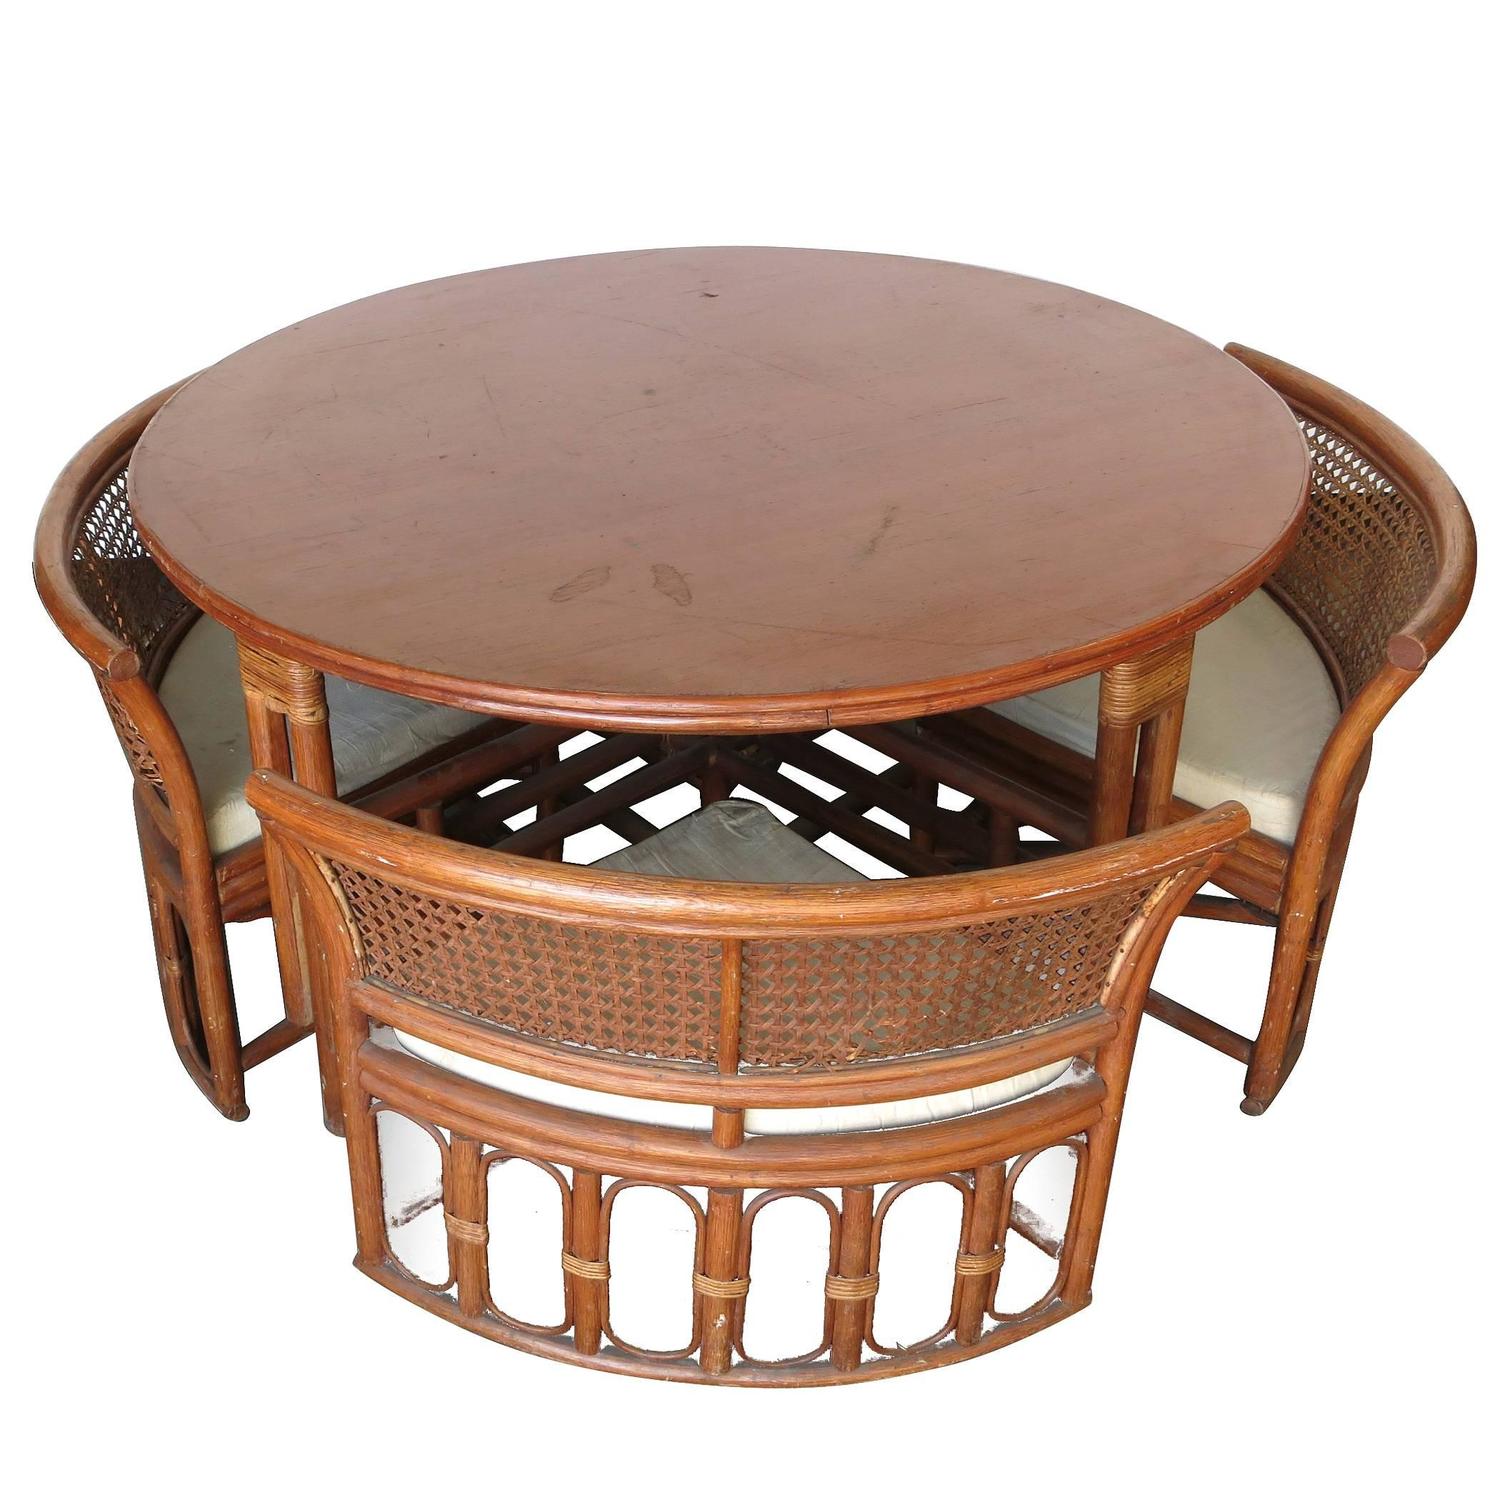 Dining Table With Hidden Chairs Dining Chairs Table Hidden Rattan Wicker Coffee Room Tables Furniture Sets Outdoor